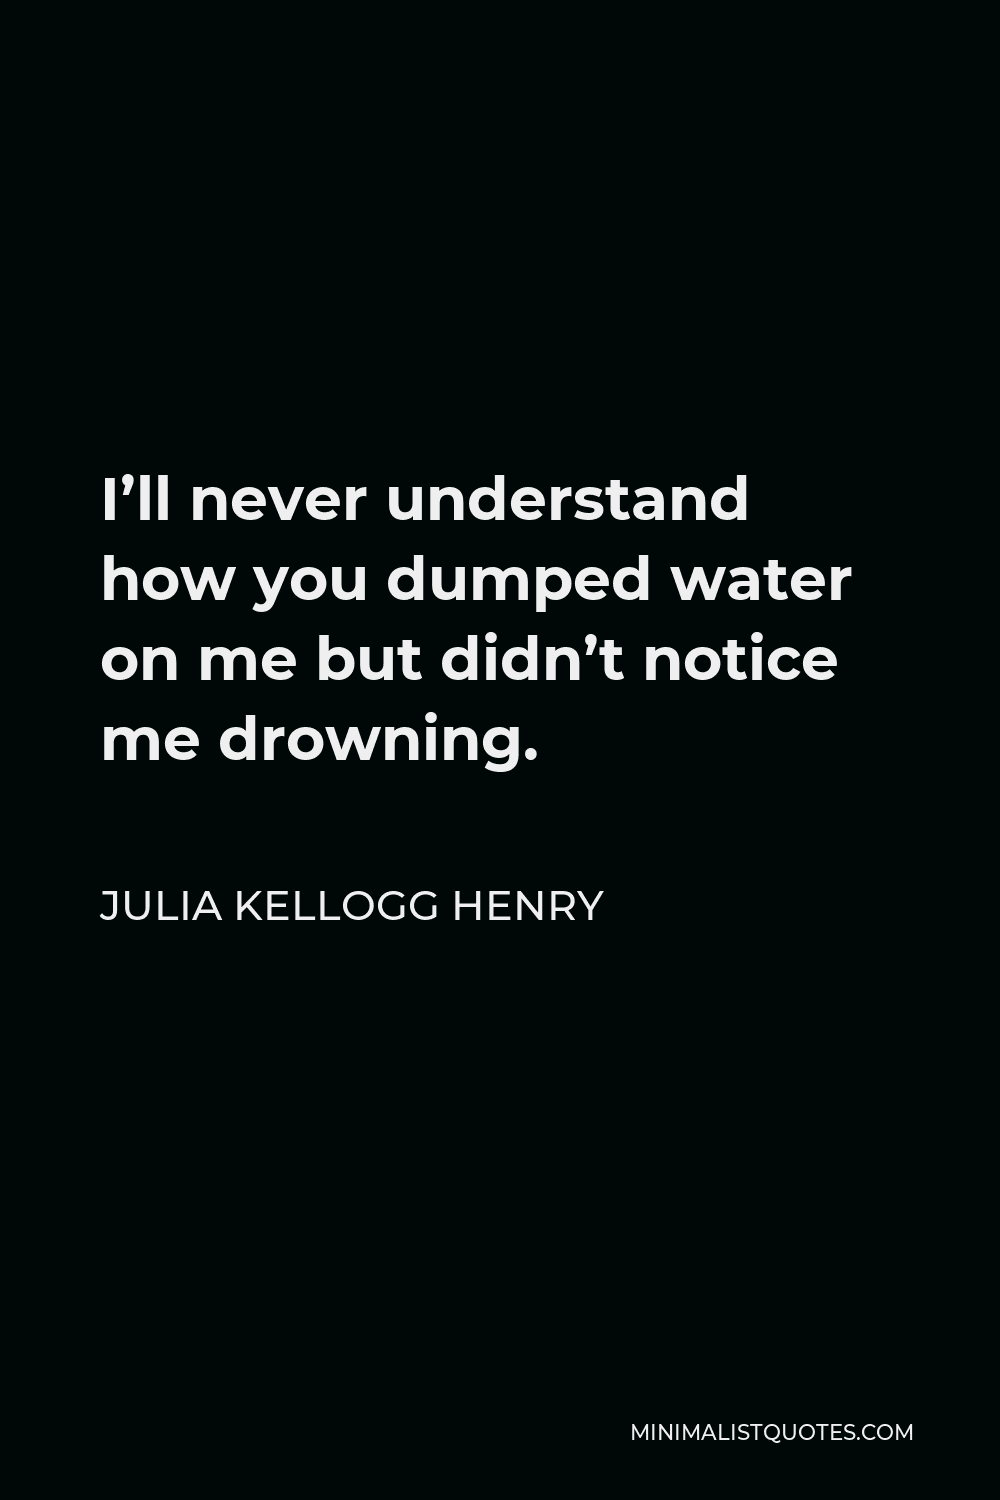 Julia Kellogg Henry Quote - I’ll never understand how you dumped water on me but didn’t notice me drowning.